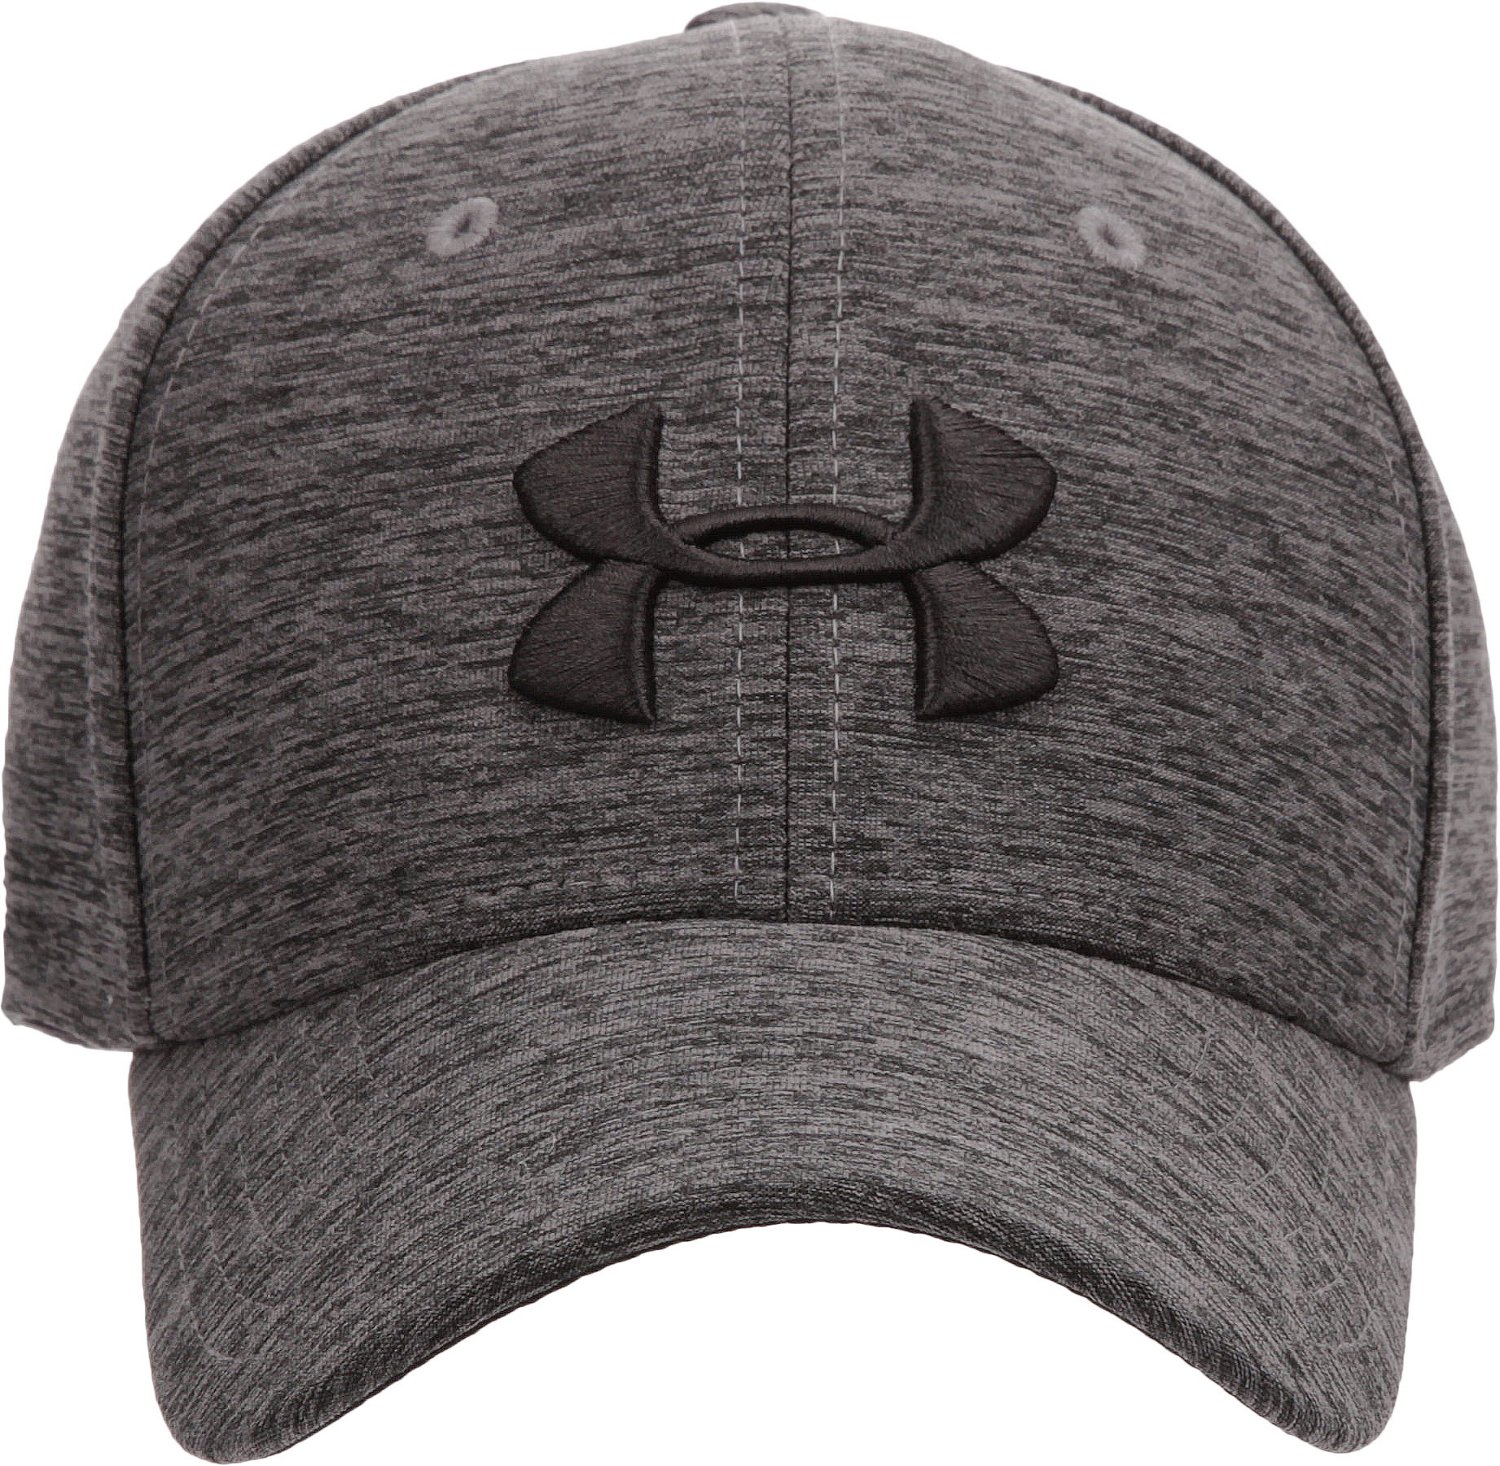 youth under armour cap